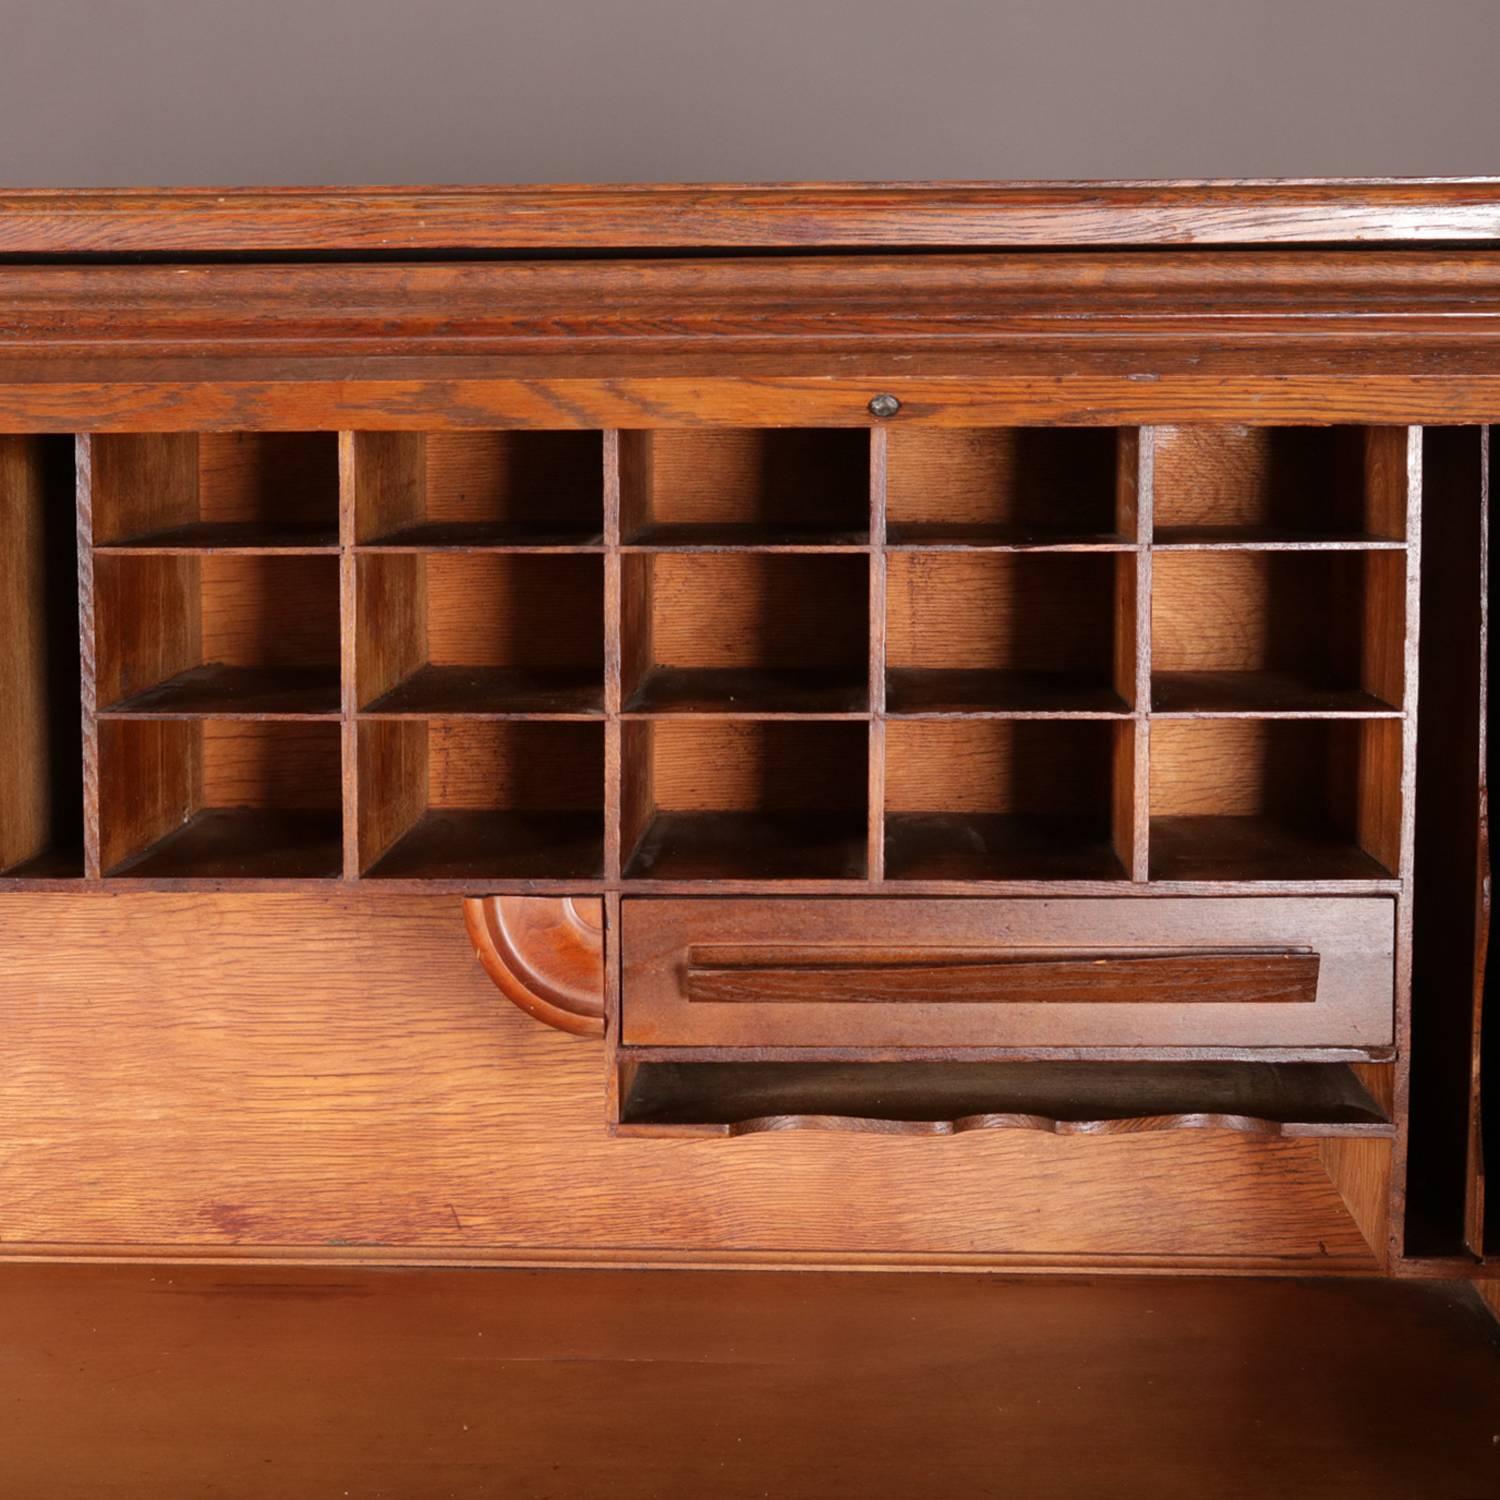 Antique derby school desk by Cutler desk factory, Buffalo, NY features quarter sawn oak construction with s-form roll top opening to interior pigeon holes and drawers; paneled sides and back; flanking drawers; circa 1900.

Measures: 50.5